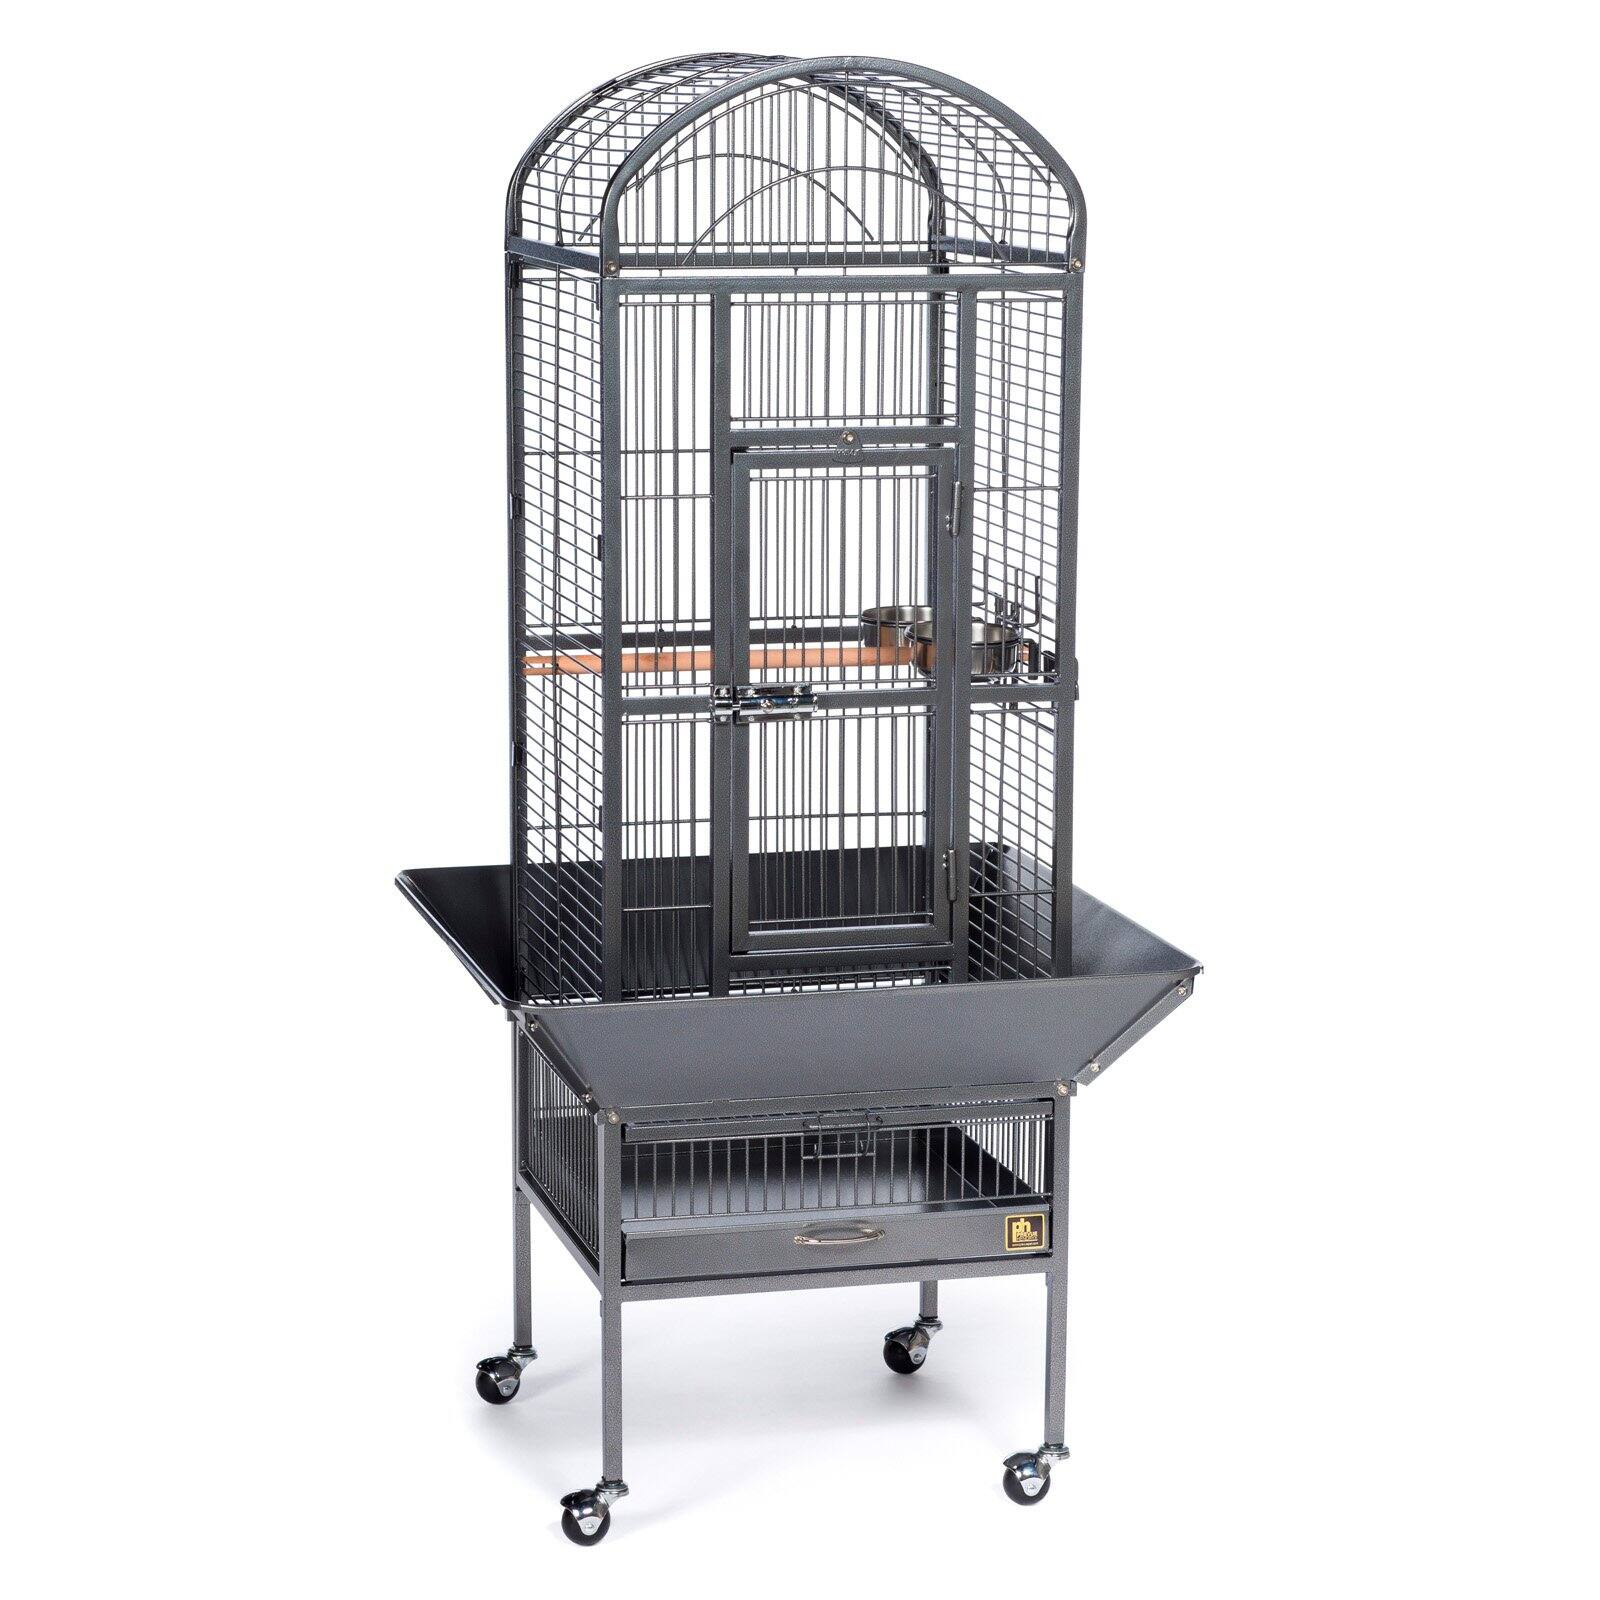 Prevue Pet Products Small Dometop Bird Cage Black Hammertone 34511 - image 1 of 11